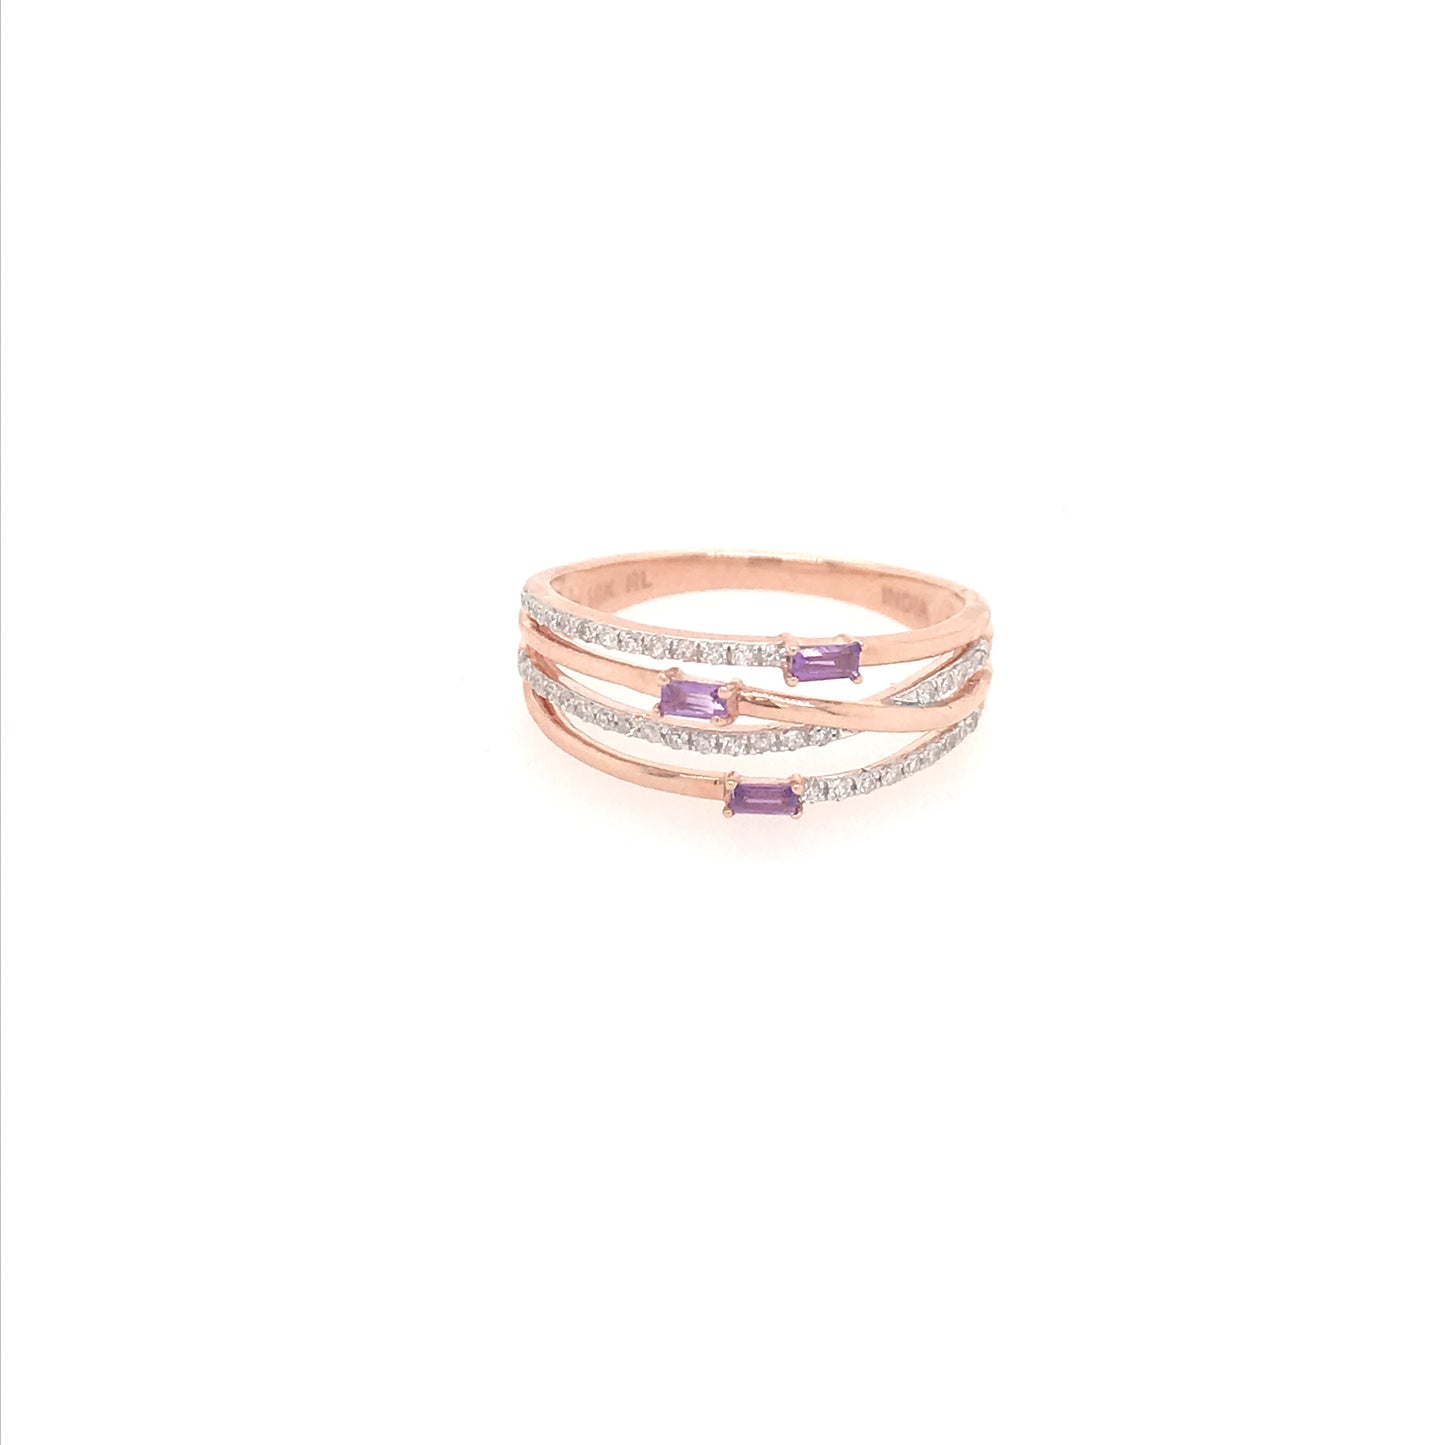 10k Rose Gold and Amethyst Stone Ring - HK Jewels